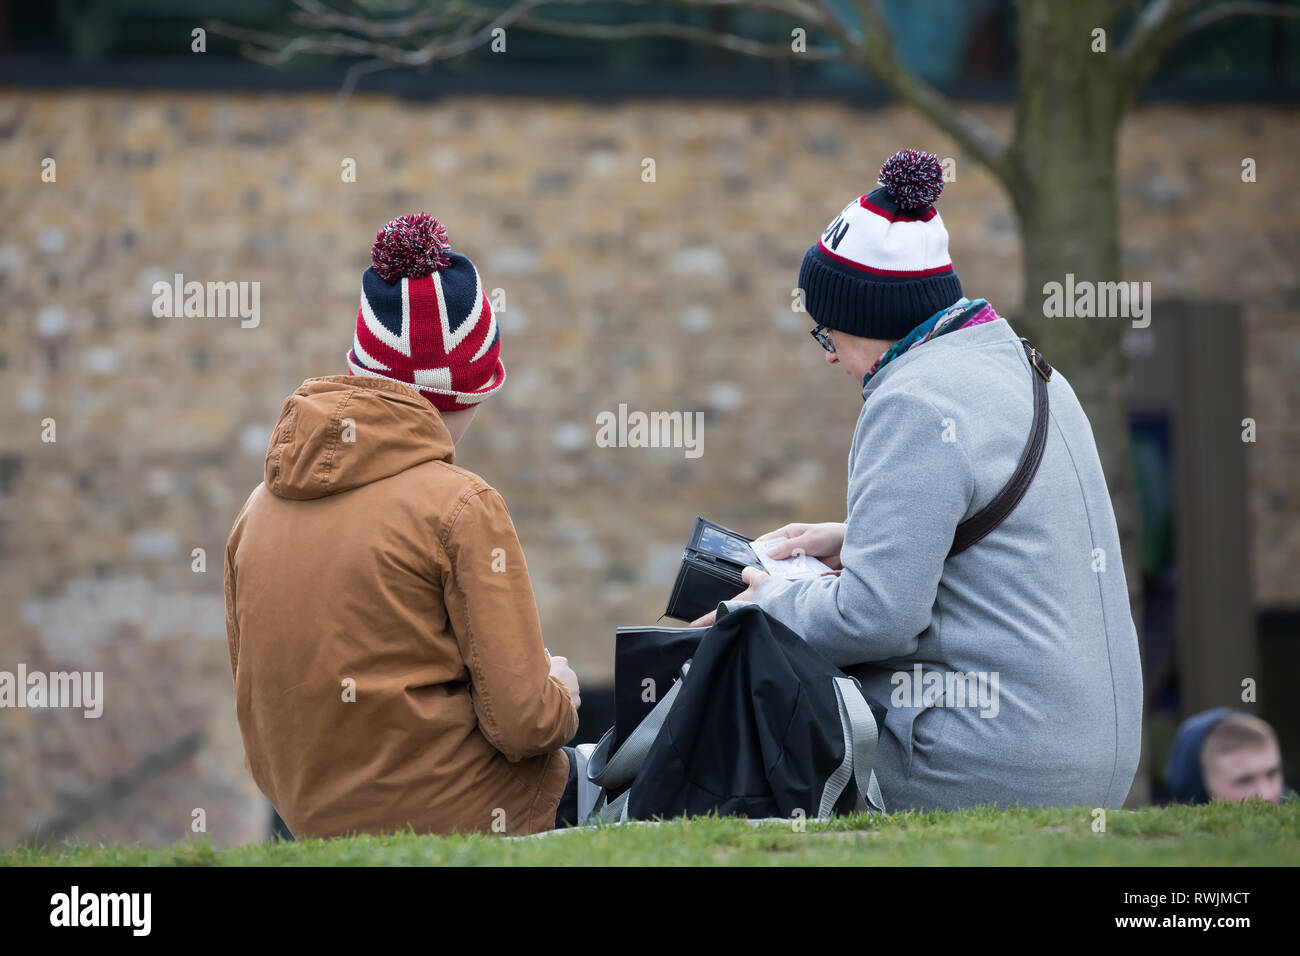 London, UK. 7th Mar, 2019. People sitting down on the Queenswalk in London enjoying the sunshine and River views wearing bobble hats. Strong winds are forecast for this afternoon in London again. Credit: Keith Larby/Alamy Live News Stock Photo